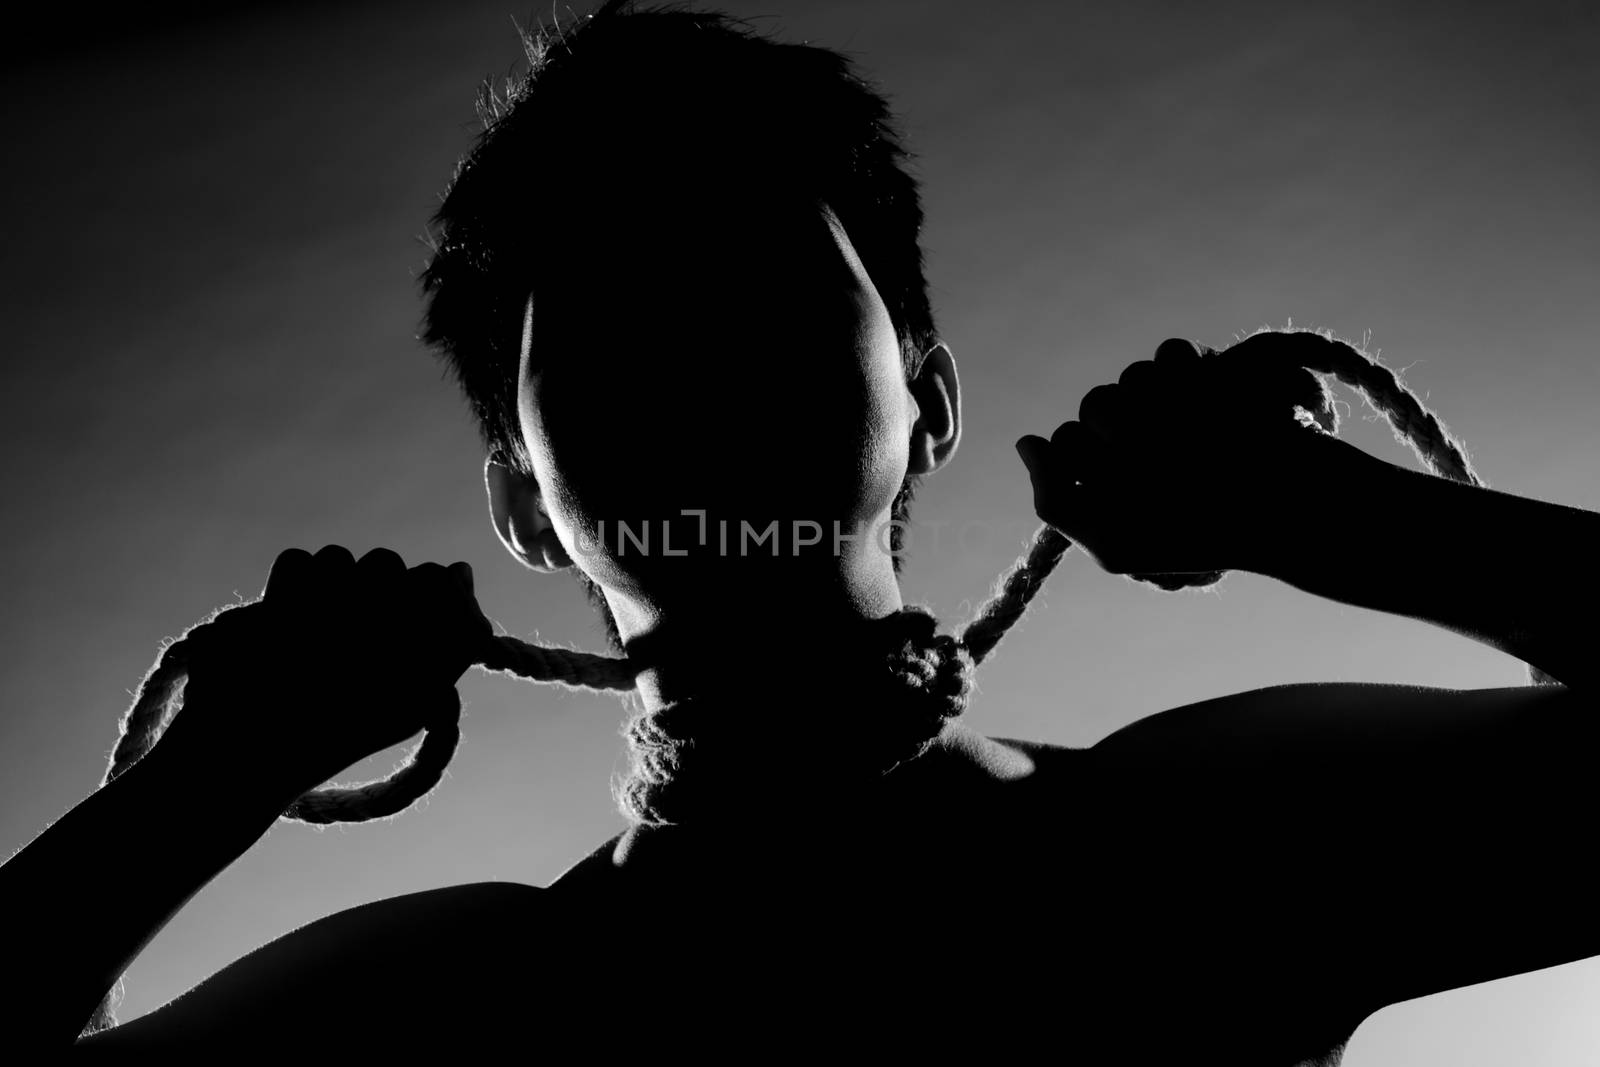 girl with short hair and rope silhouette by kokimk